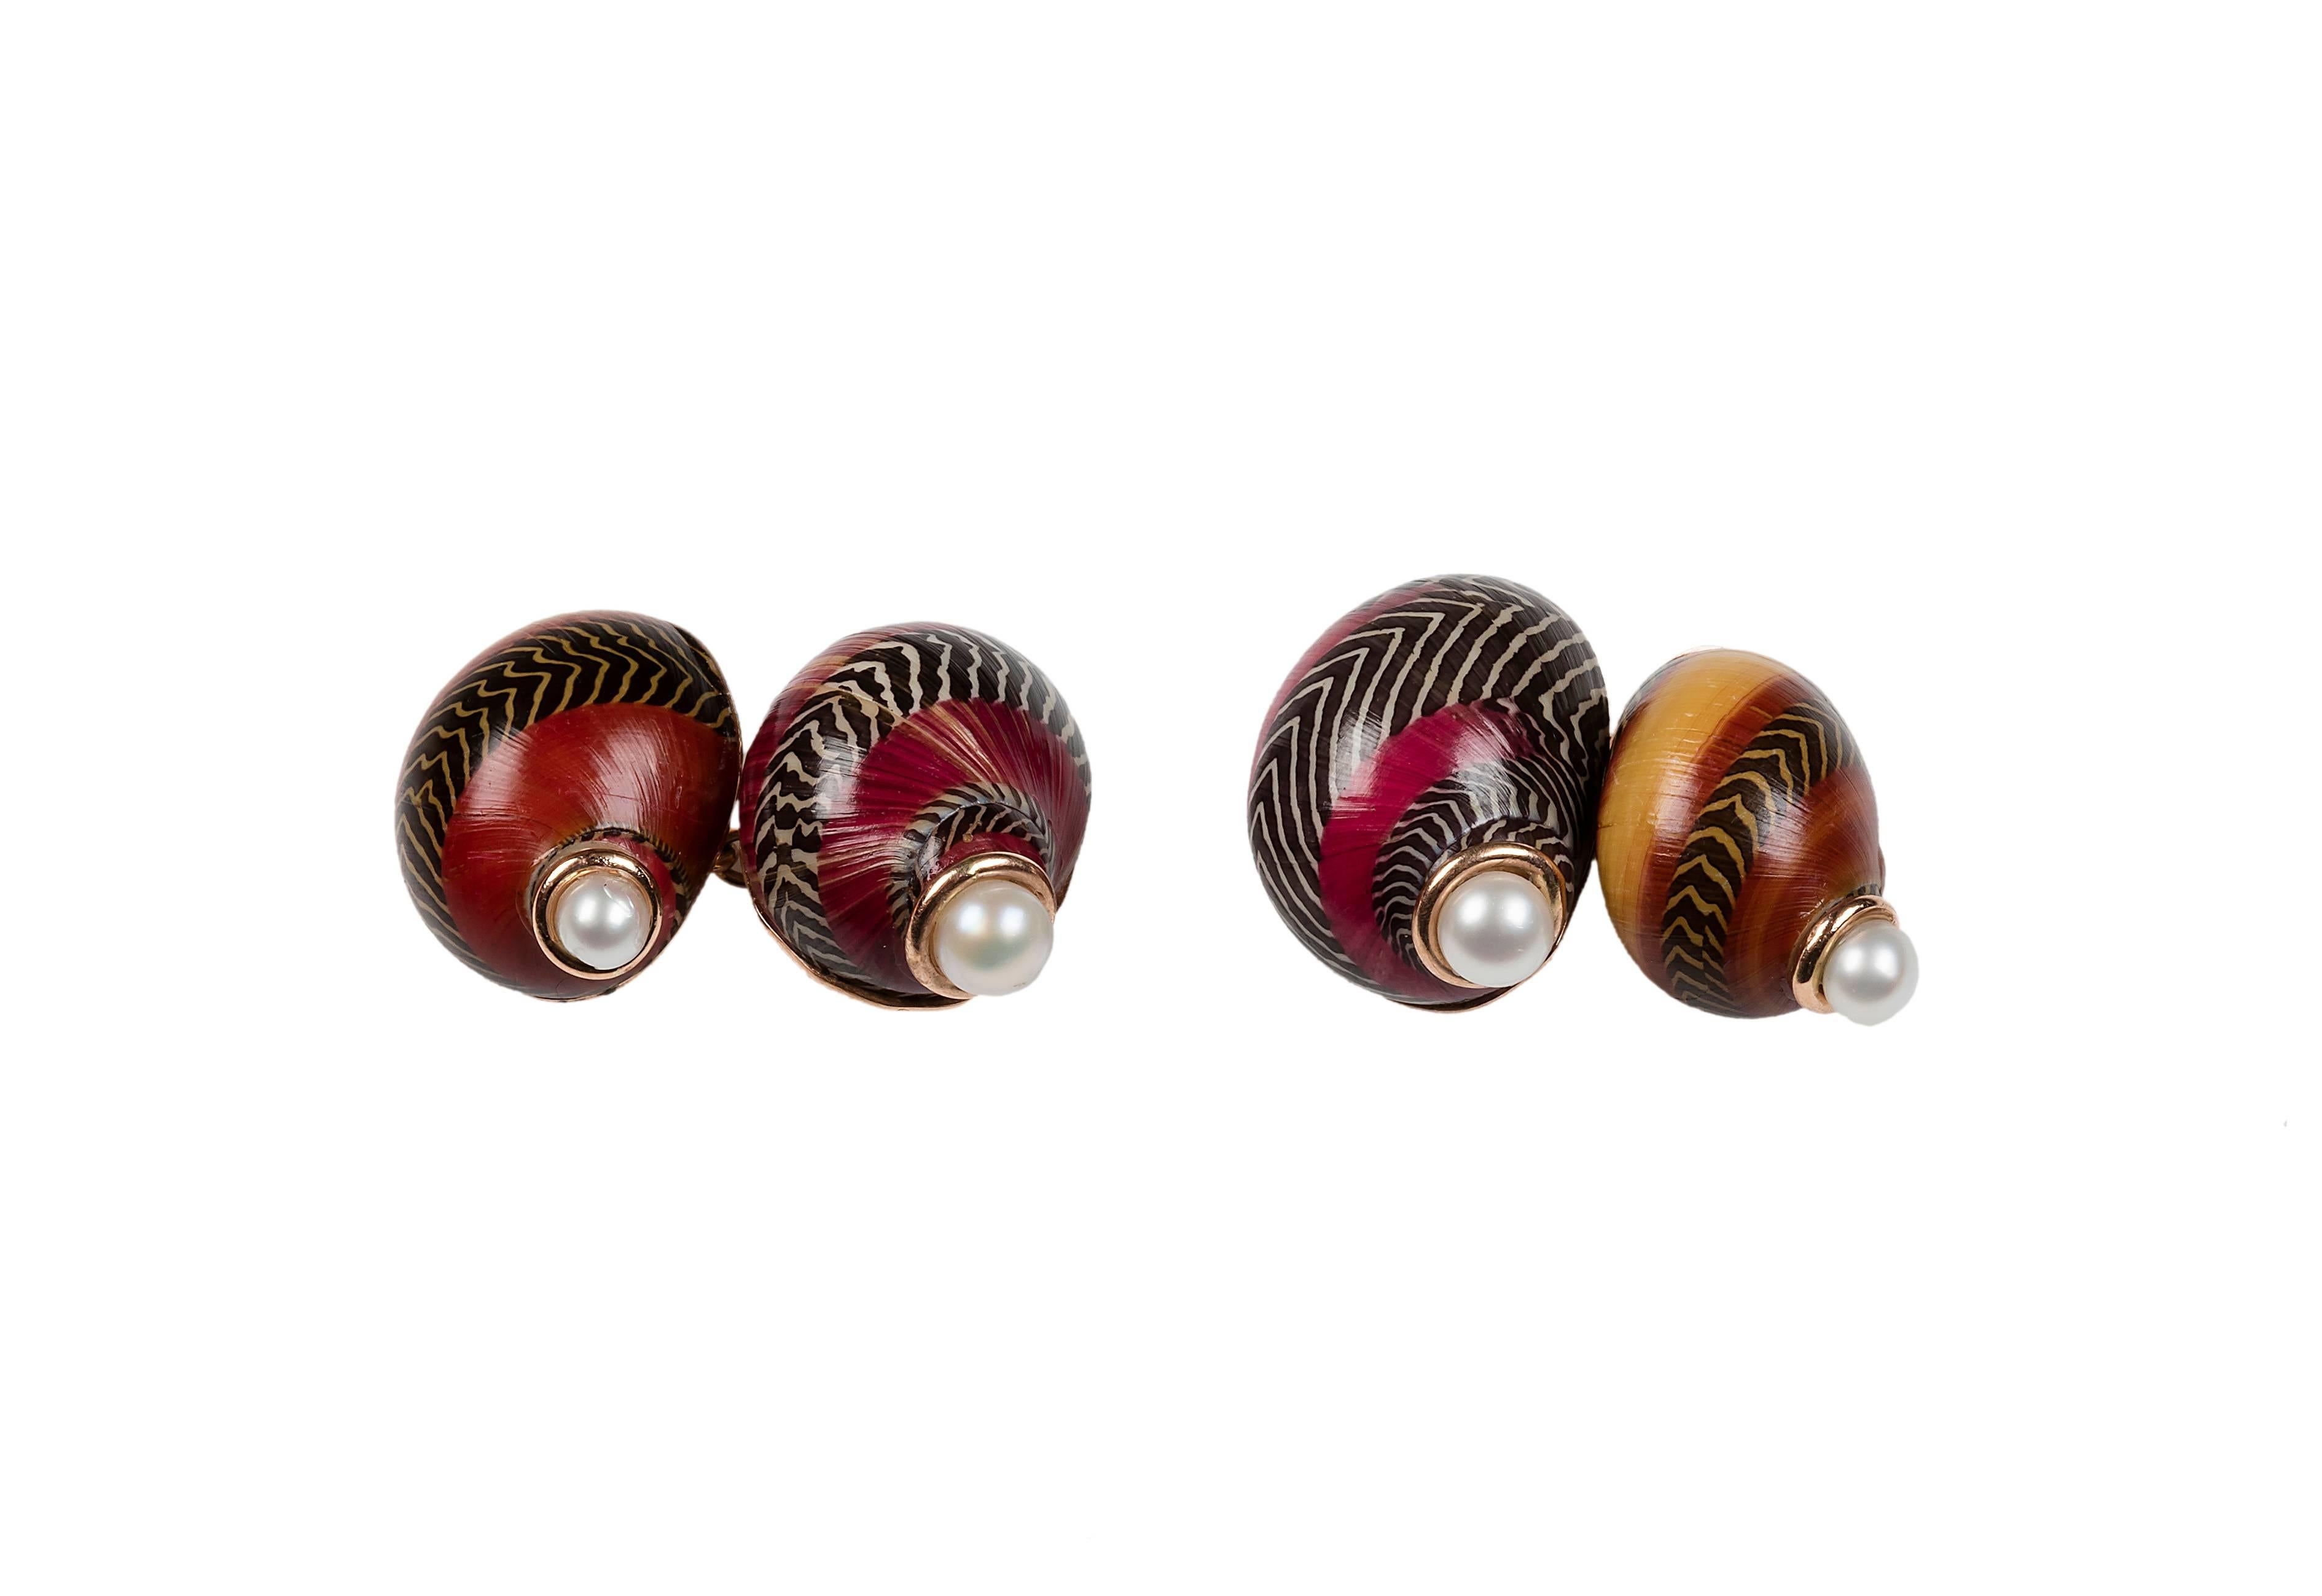 These striking cufflinks feature a matching front face and toggle made both of a Red Nerita shell. 
The natural patterns and bright colors of the shells are adorned with a simple pearl each, while the post that links the two parts is in 14 karat